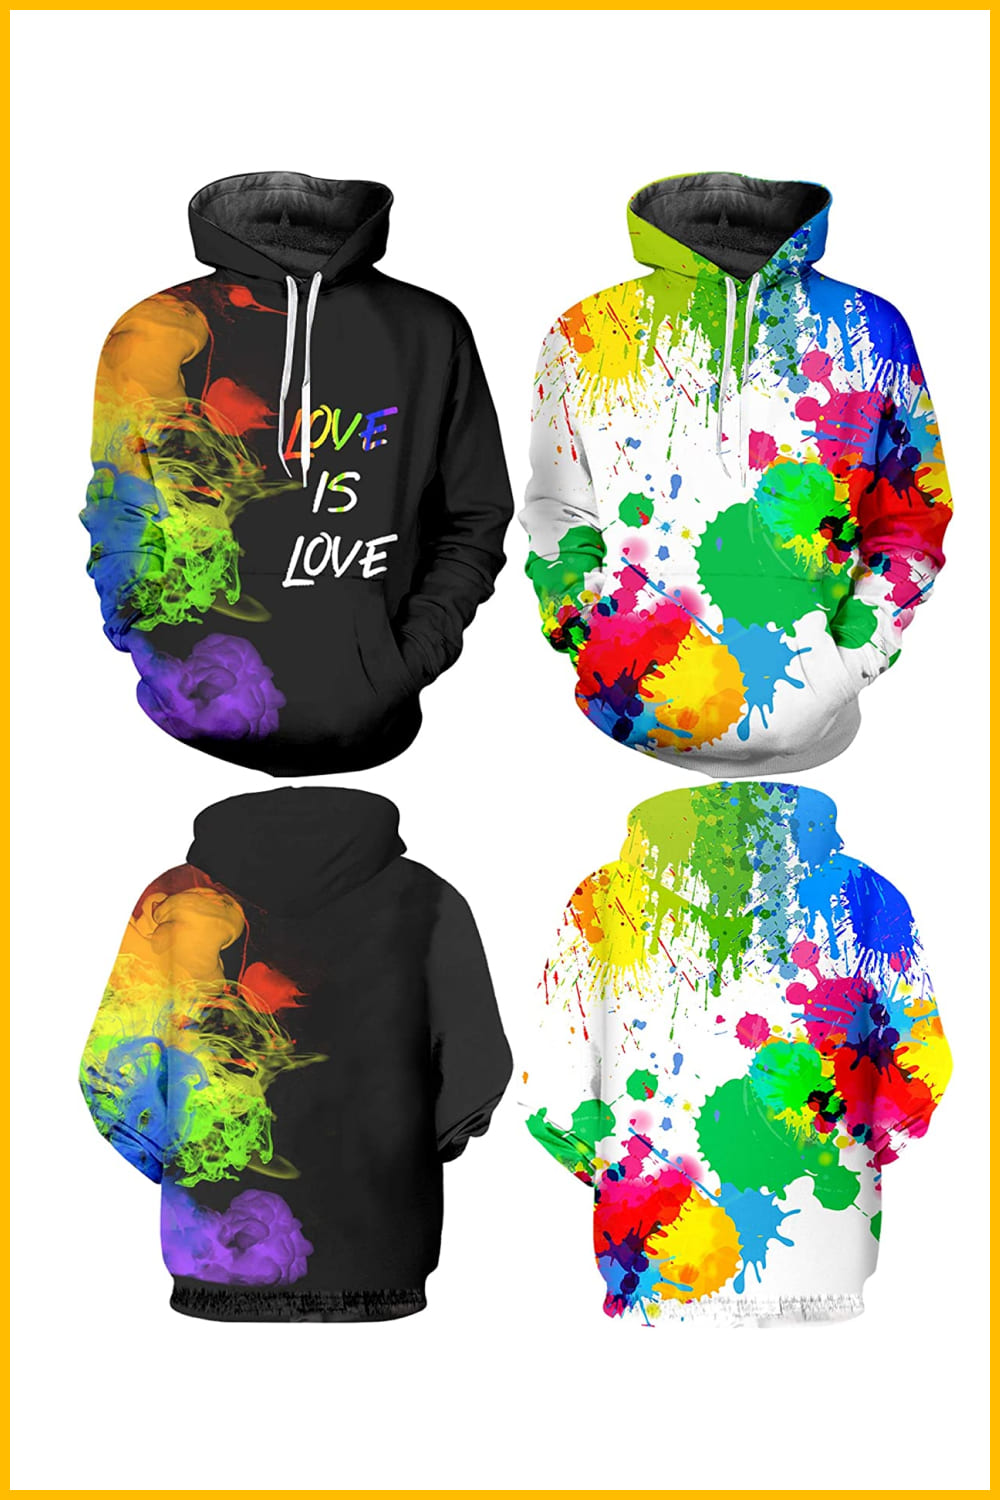 Collage of images of black and white hoodies with rainbow coloring.